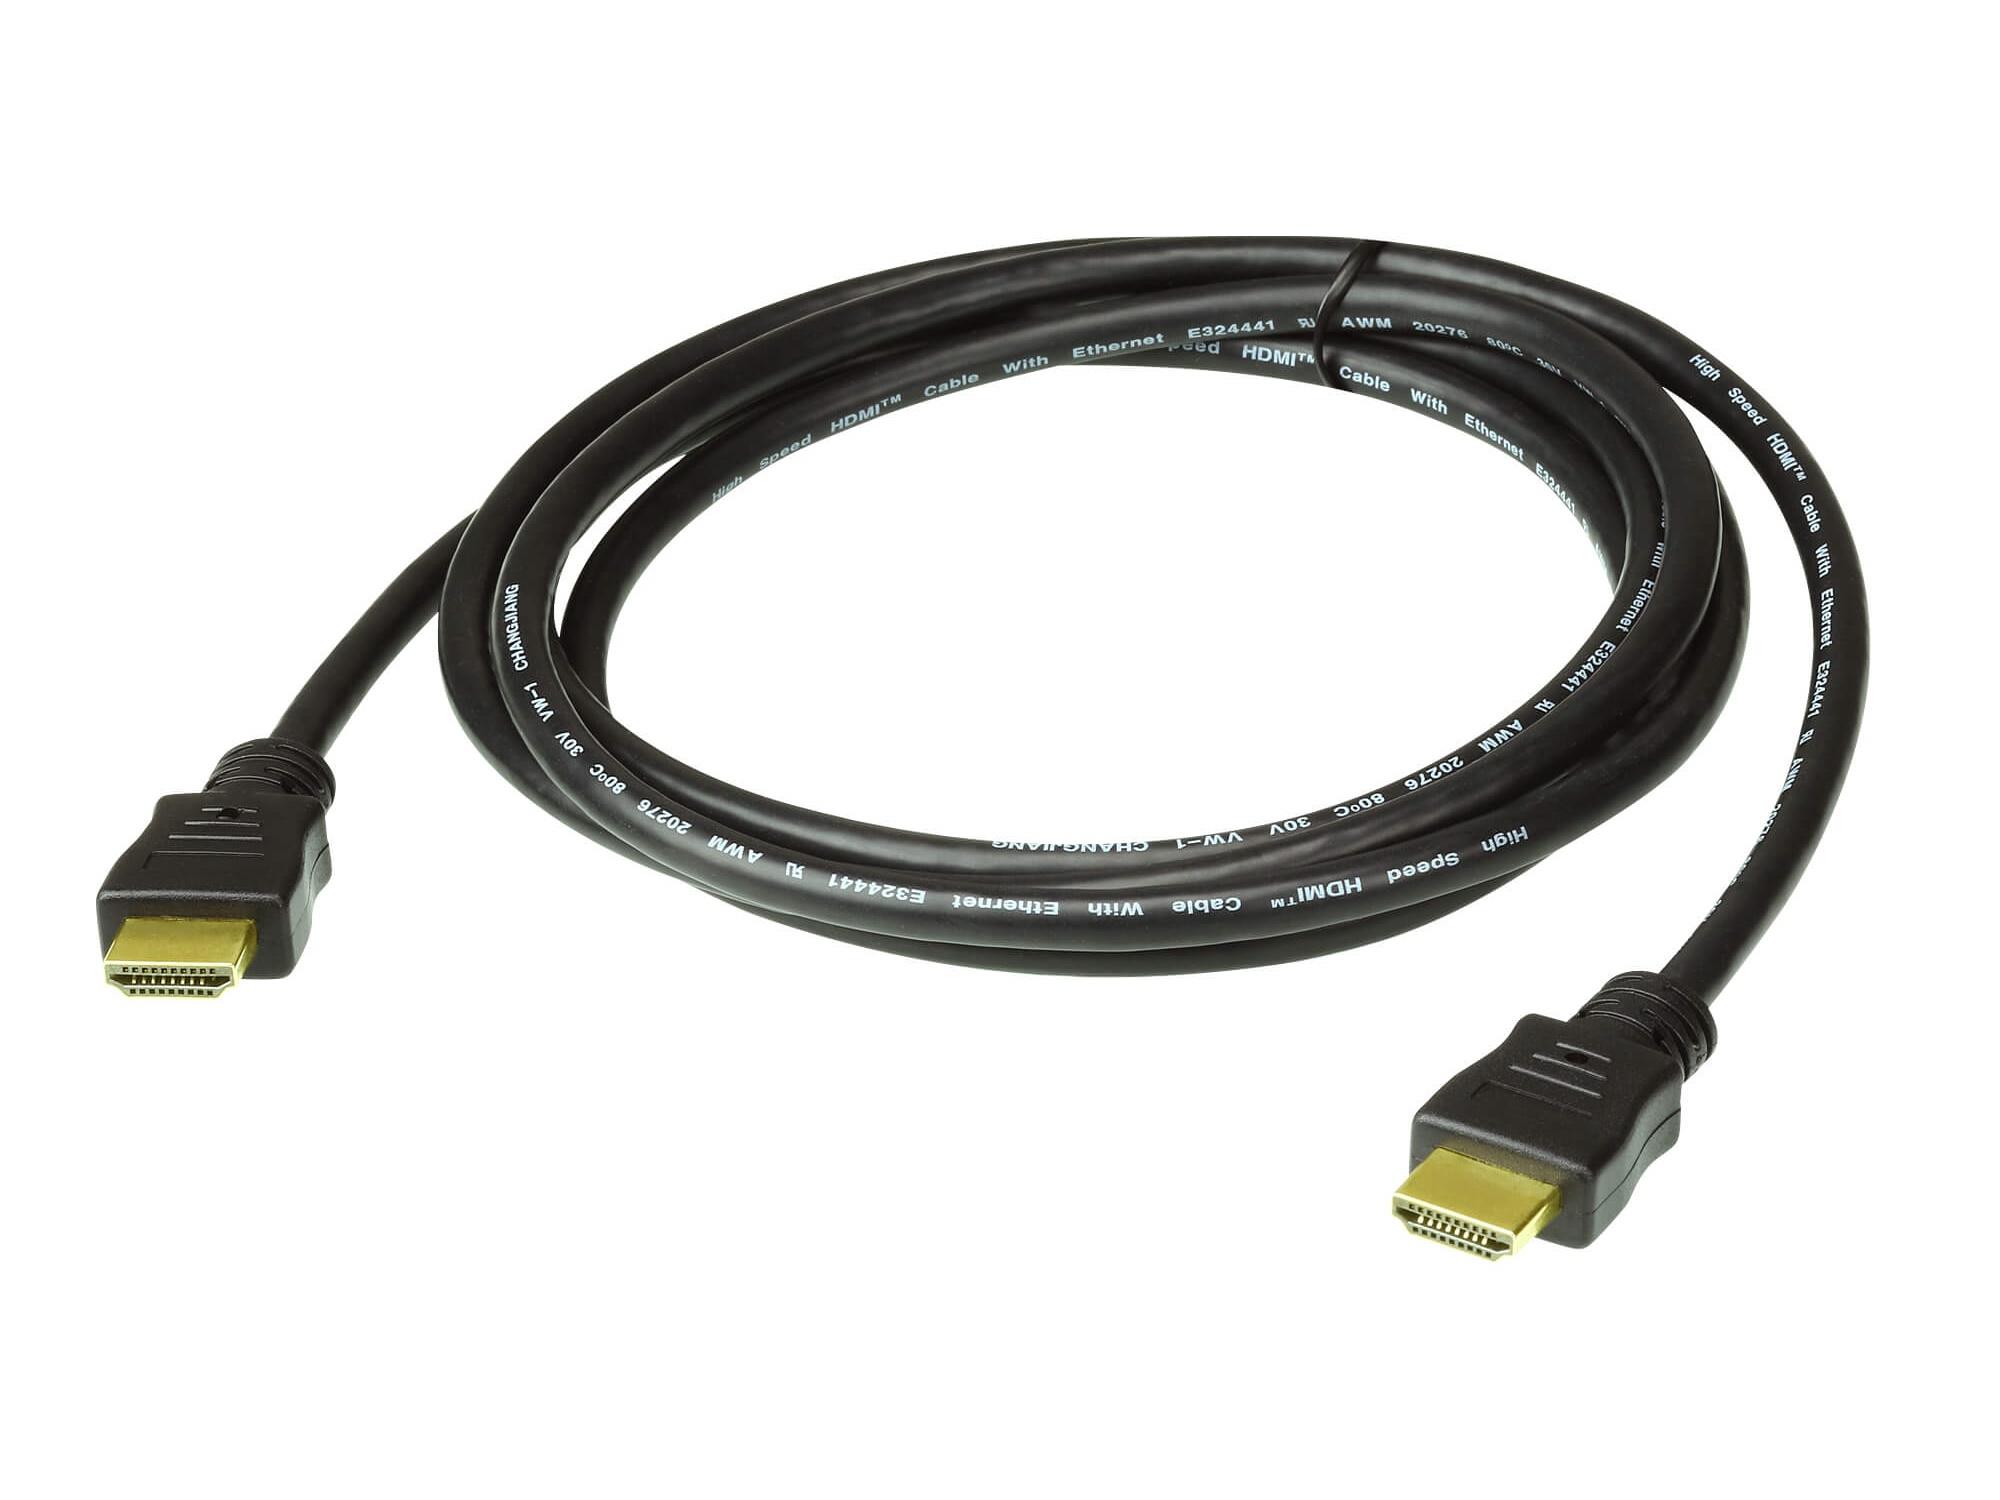 2L-7D01H 1m High Speed HDMI Cable with Ethernet by Aten